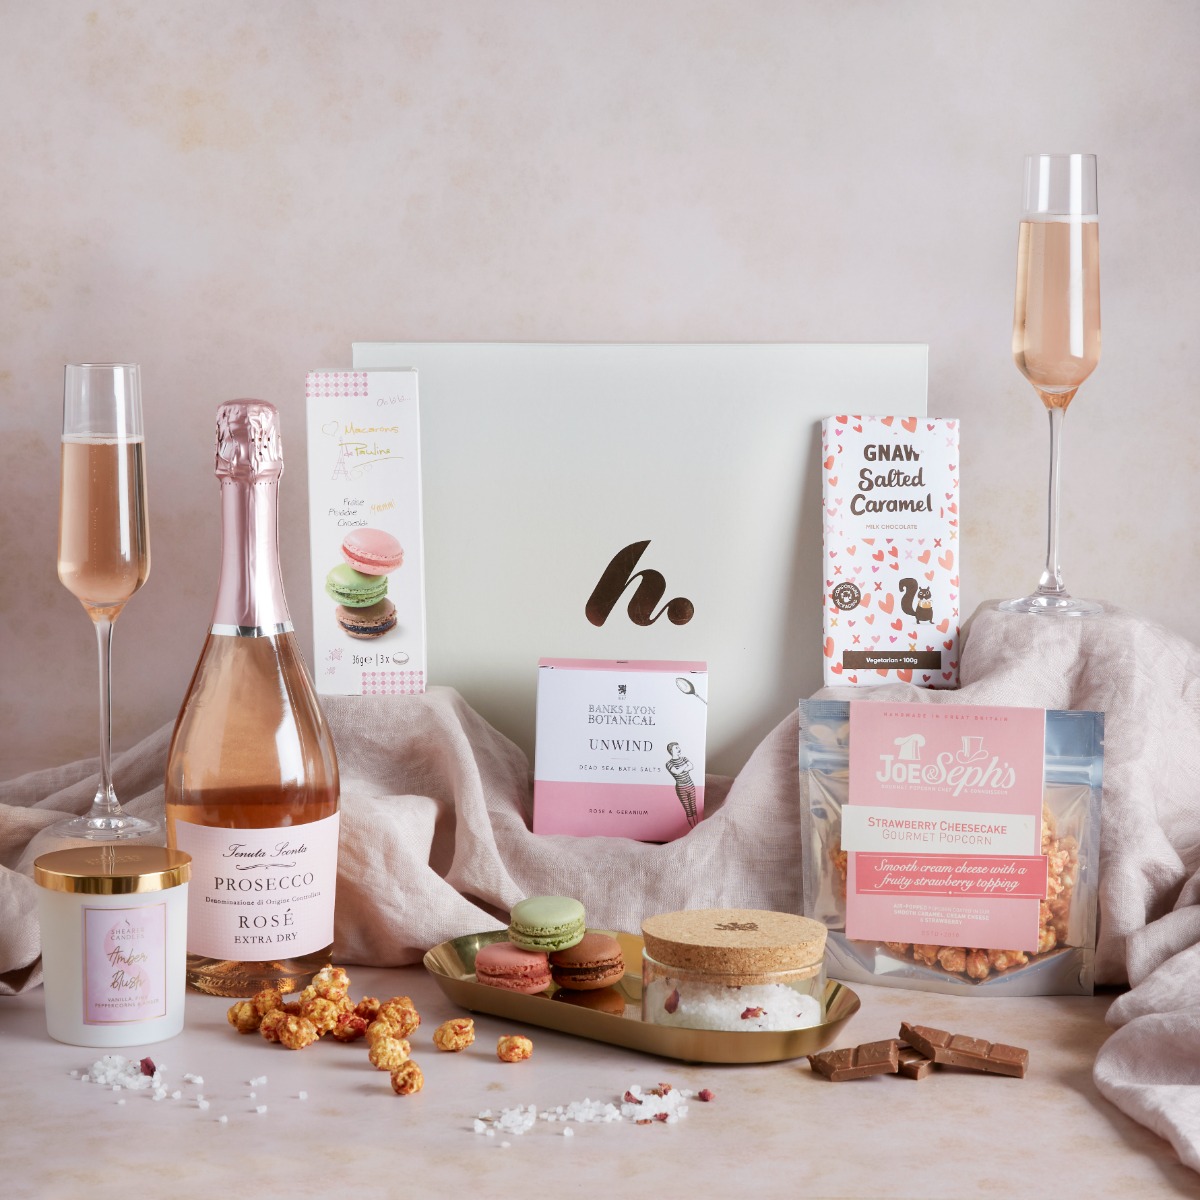 Pamper Hamper with contents on display as a recommended Prosecco Mother's Day gift